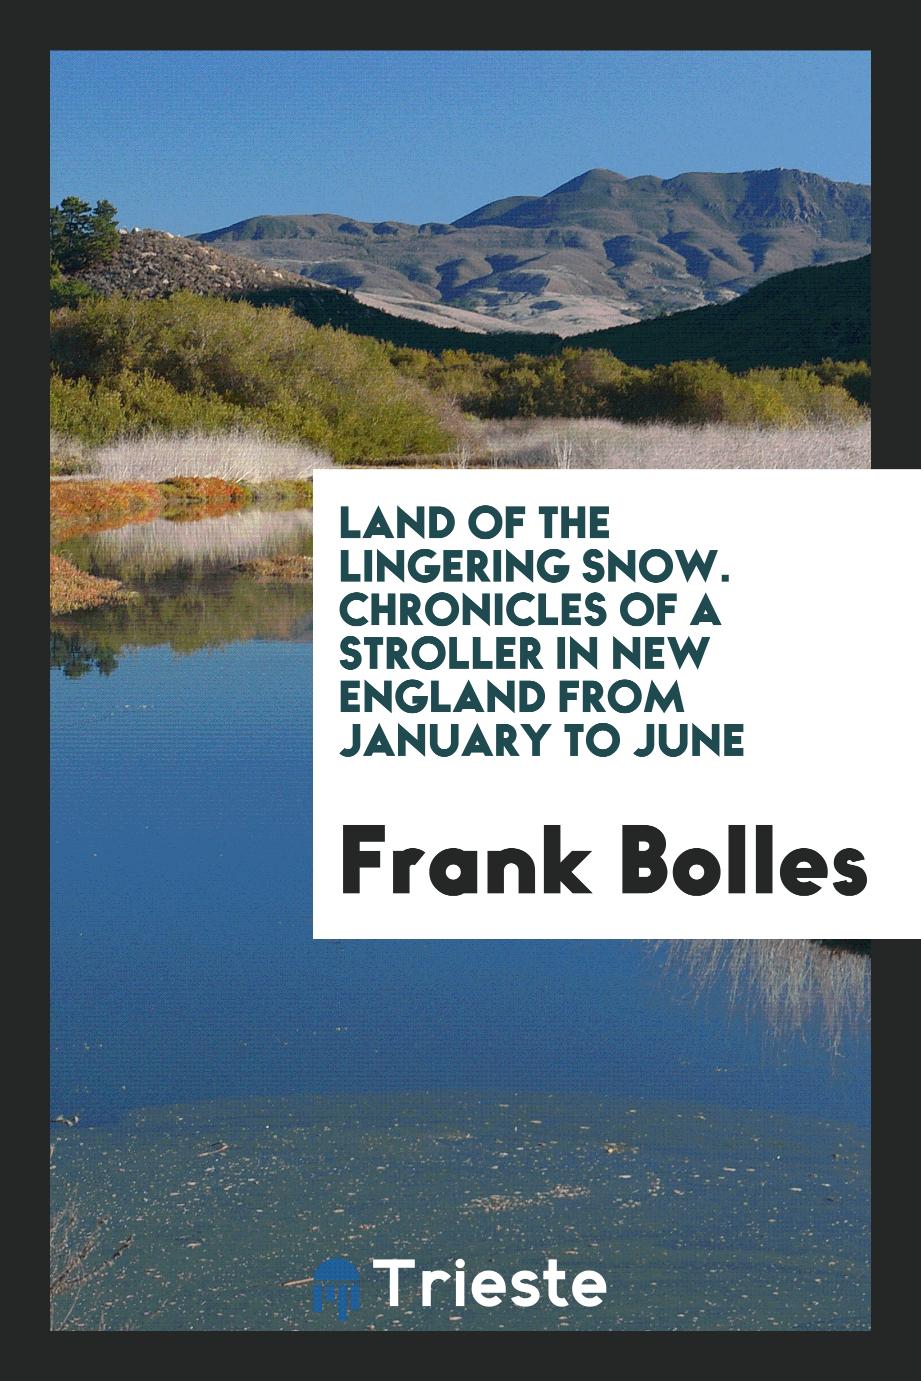 Frank Bolles - Land of the lingering snow. Chronicles of a stroller in New England from January to June